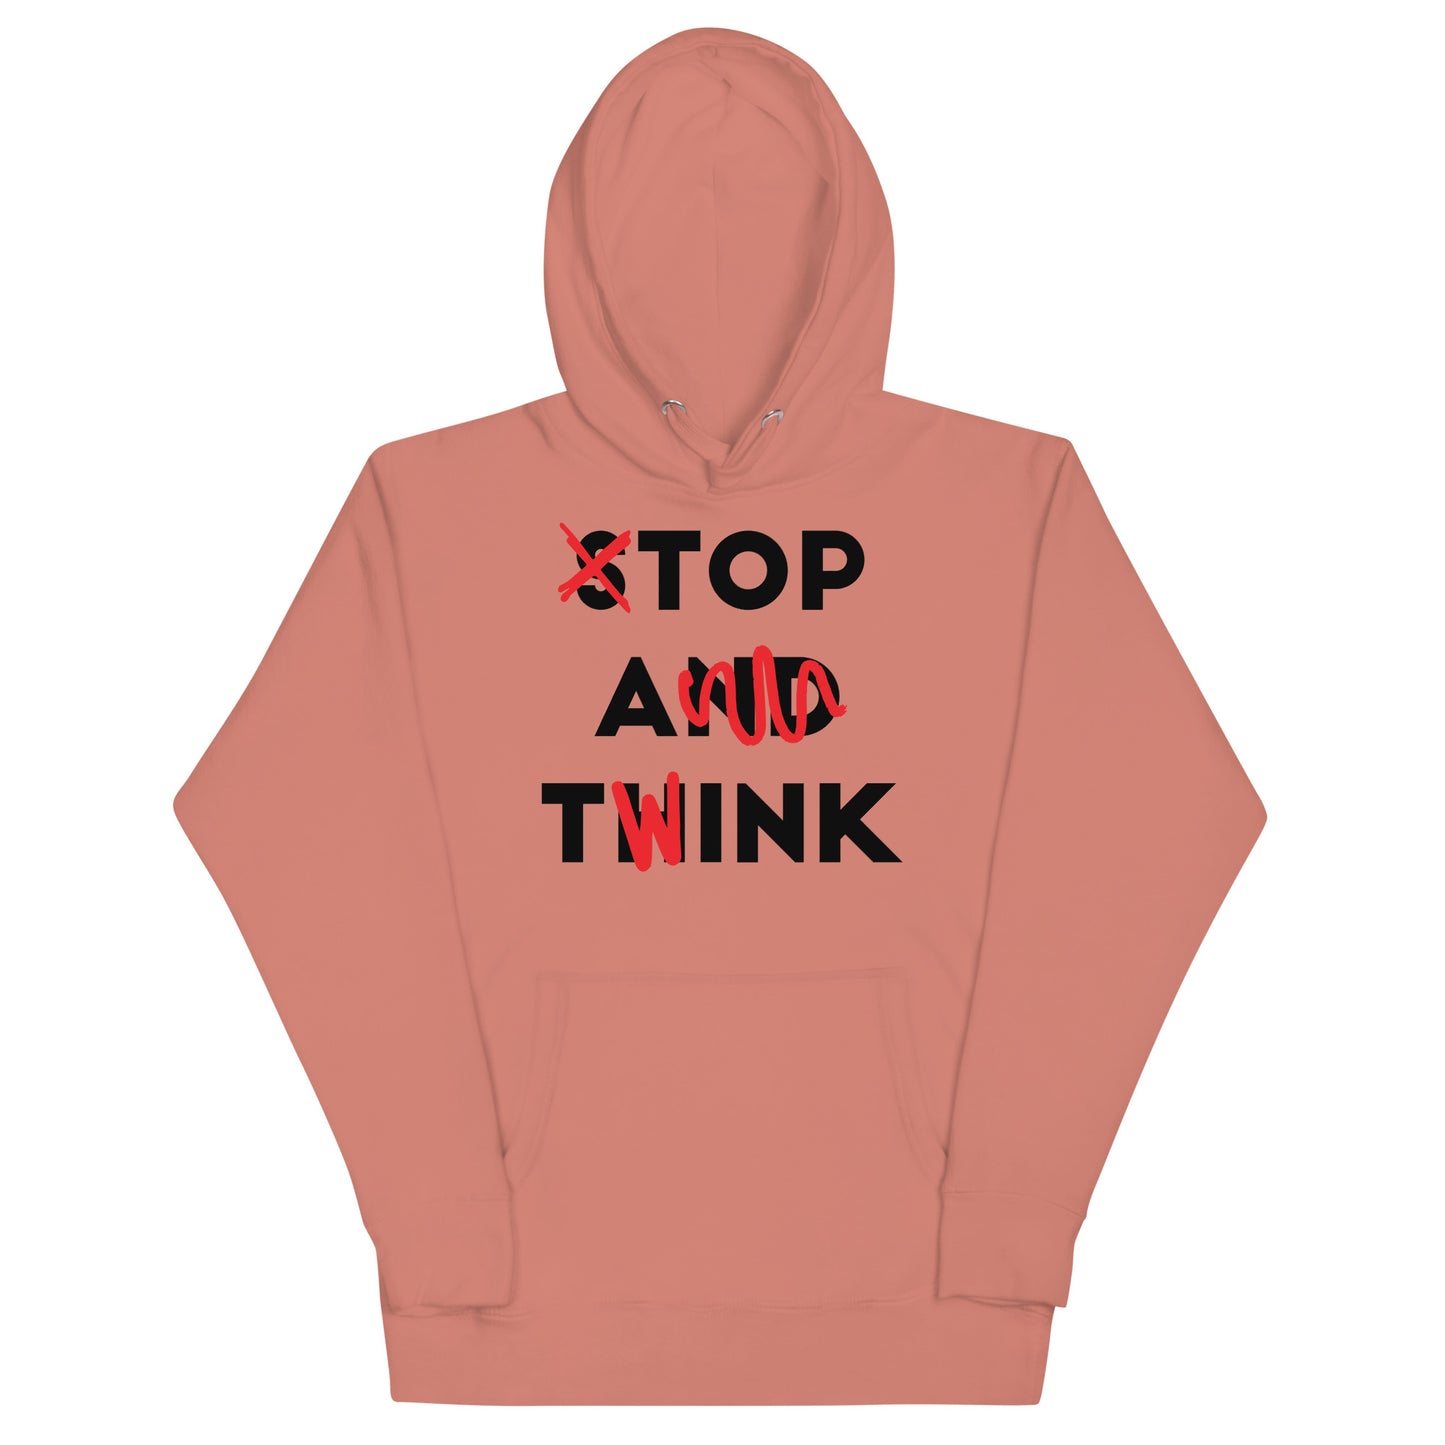 Top a Twink (Stop And Think) Unisex Hoodie